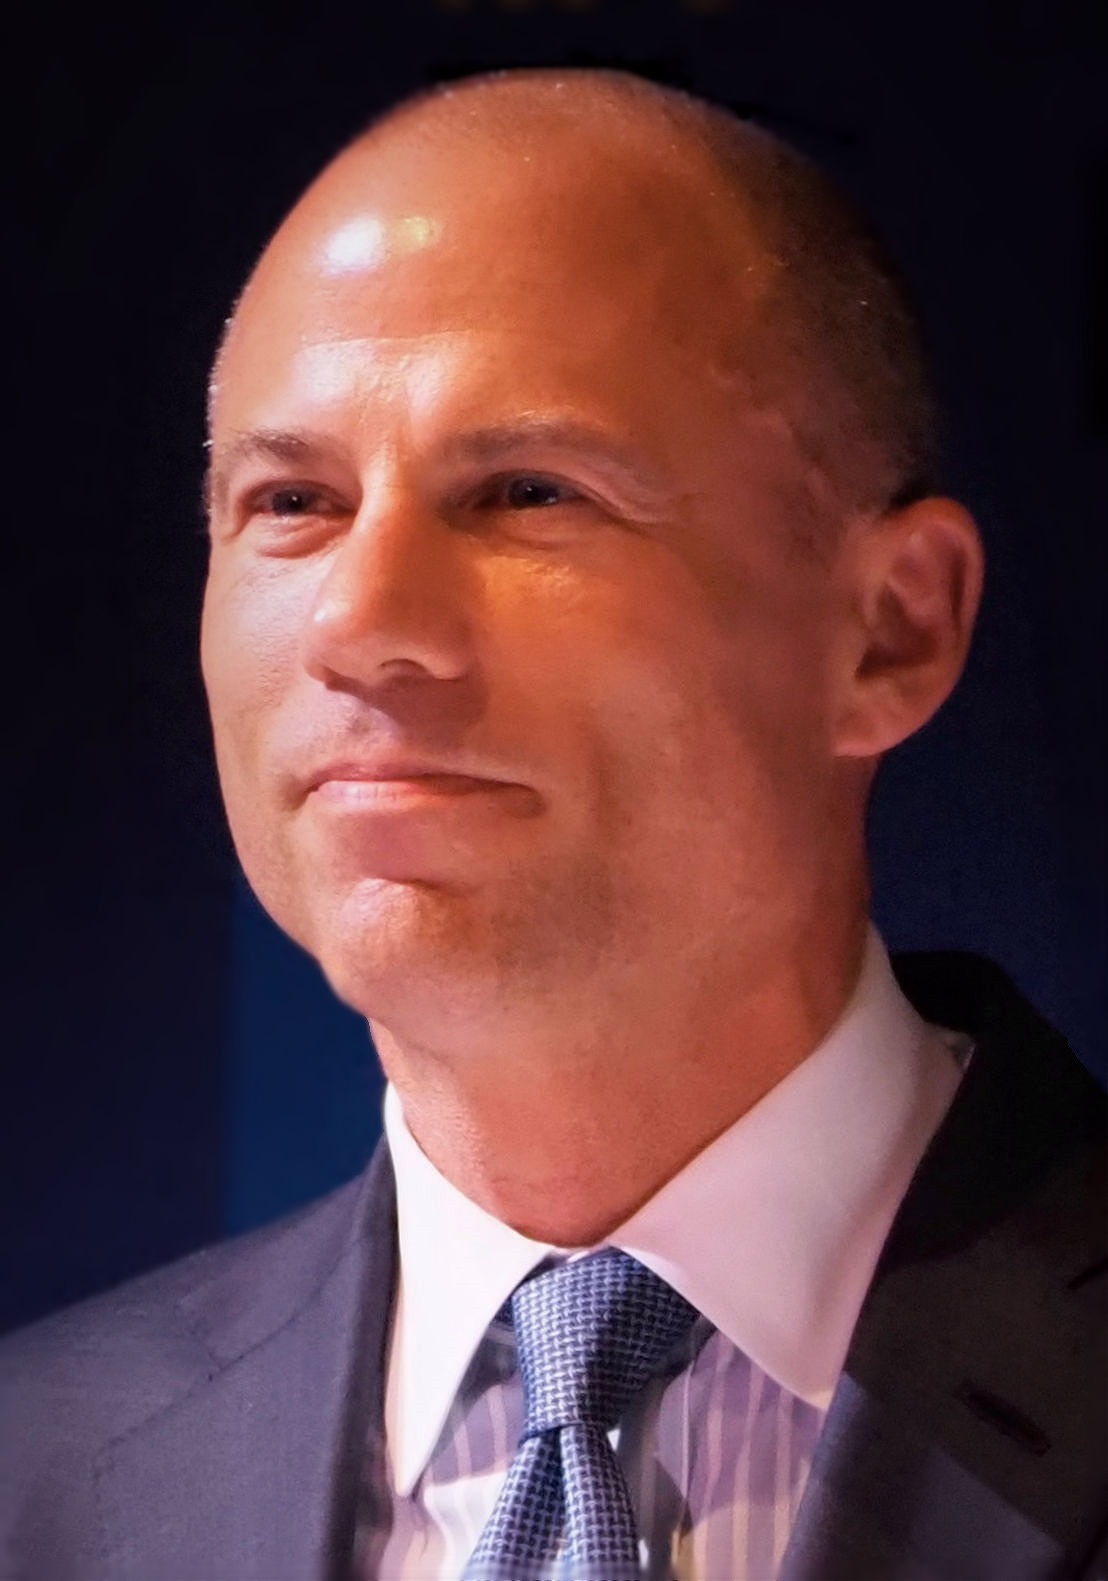 UPDATE 1-Lawyer Avenatti convicted for trying to extort Nike